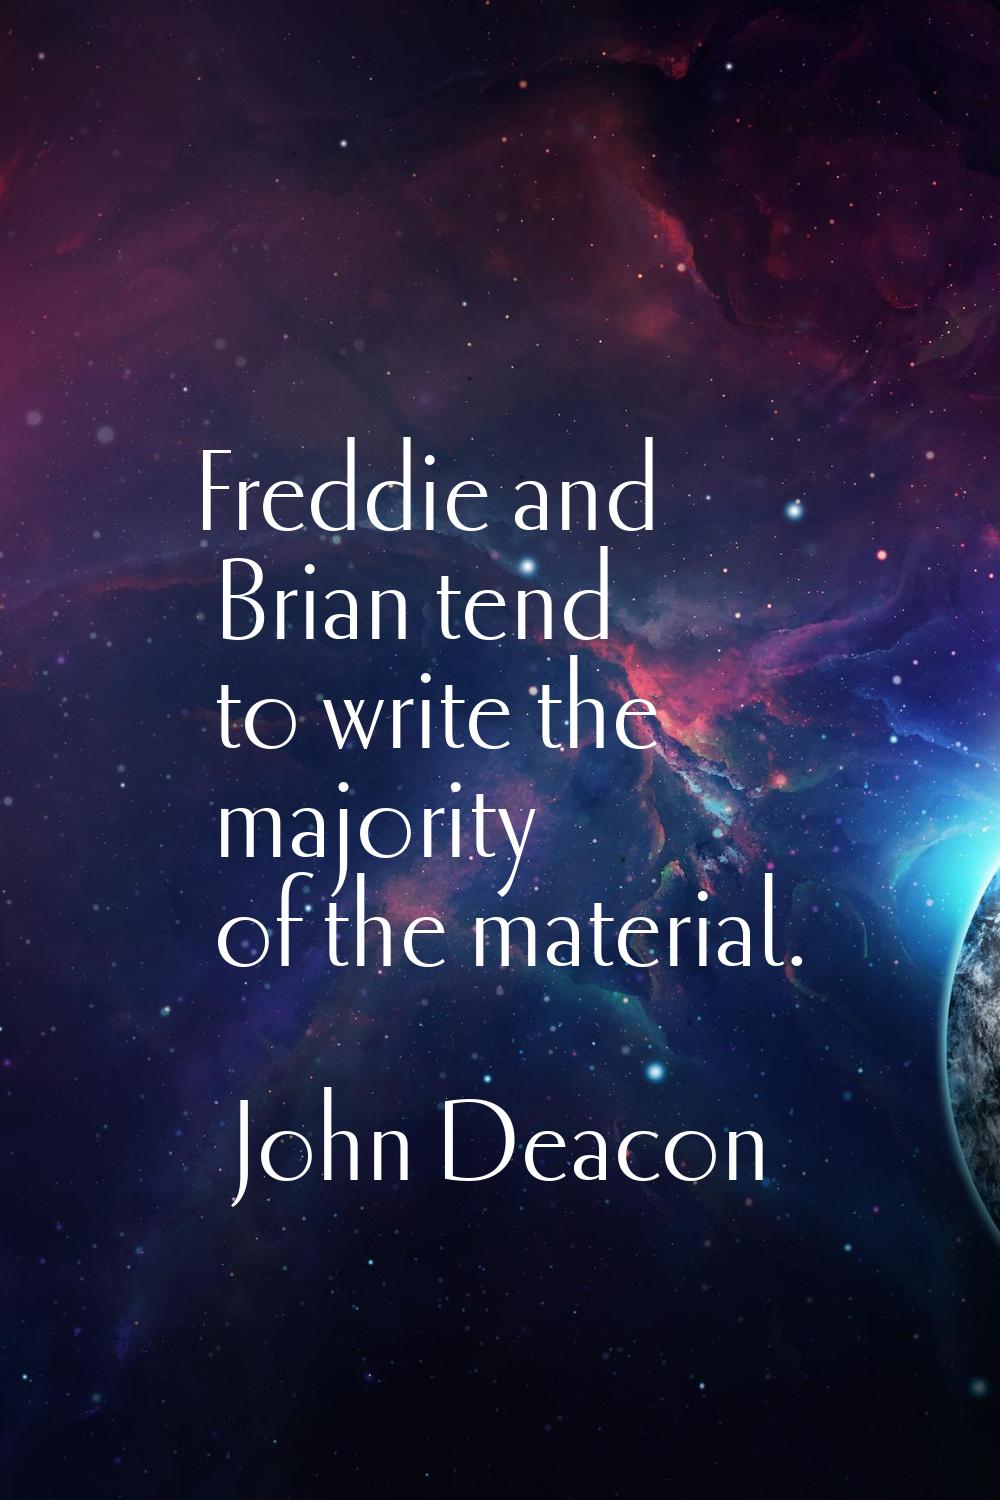 Freddie and Brian tend to write the majority of the material.